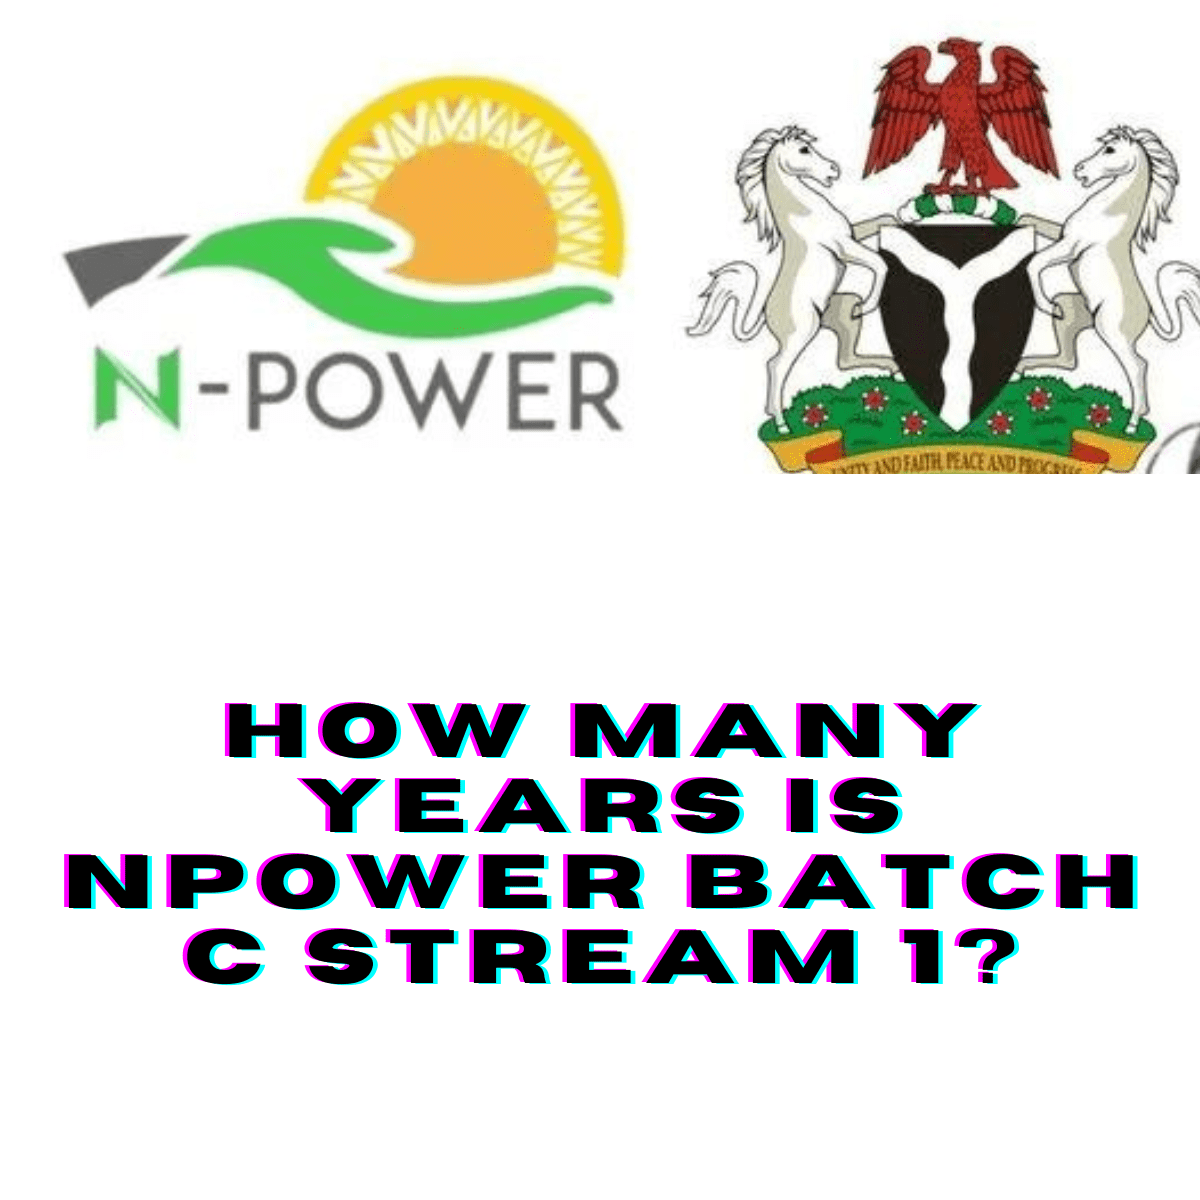 How Many Years is Npower Batch C Stream 1?